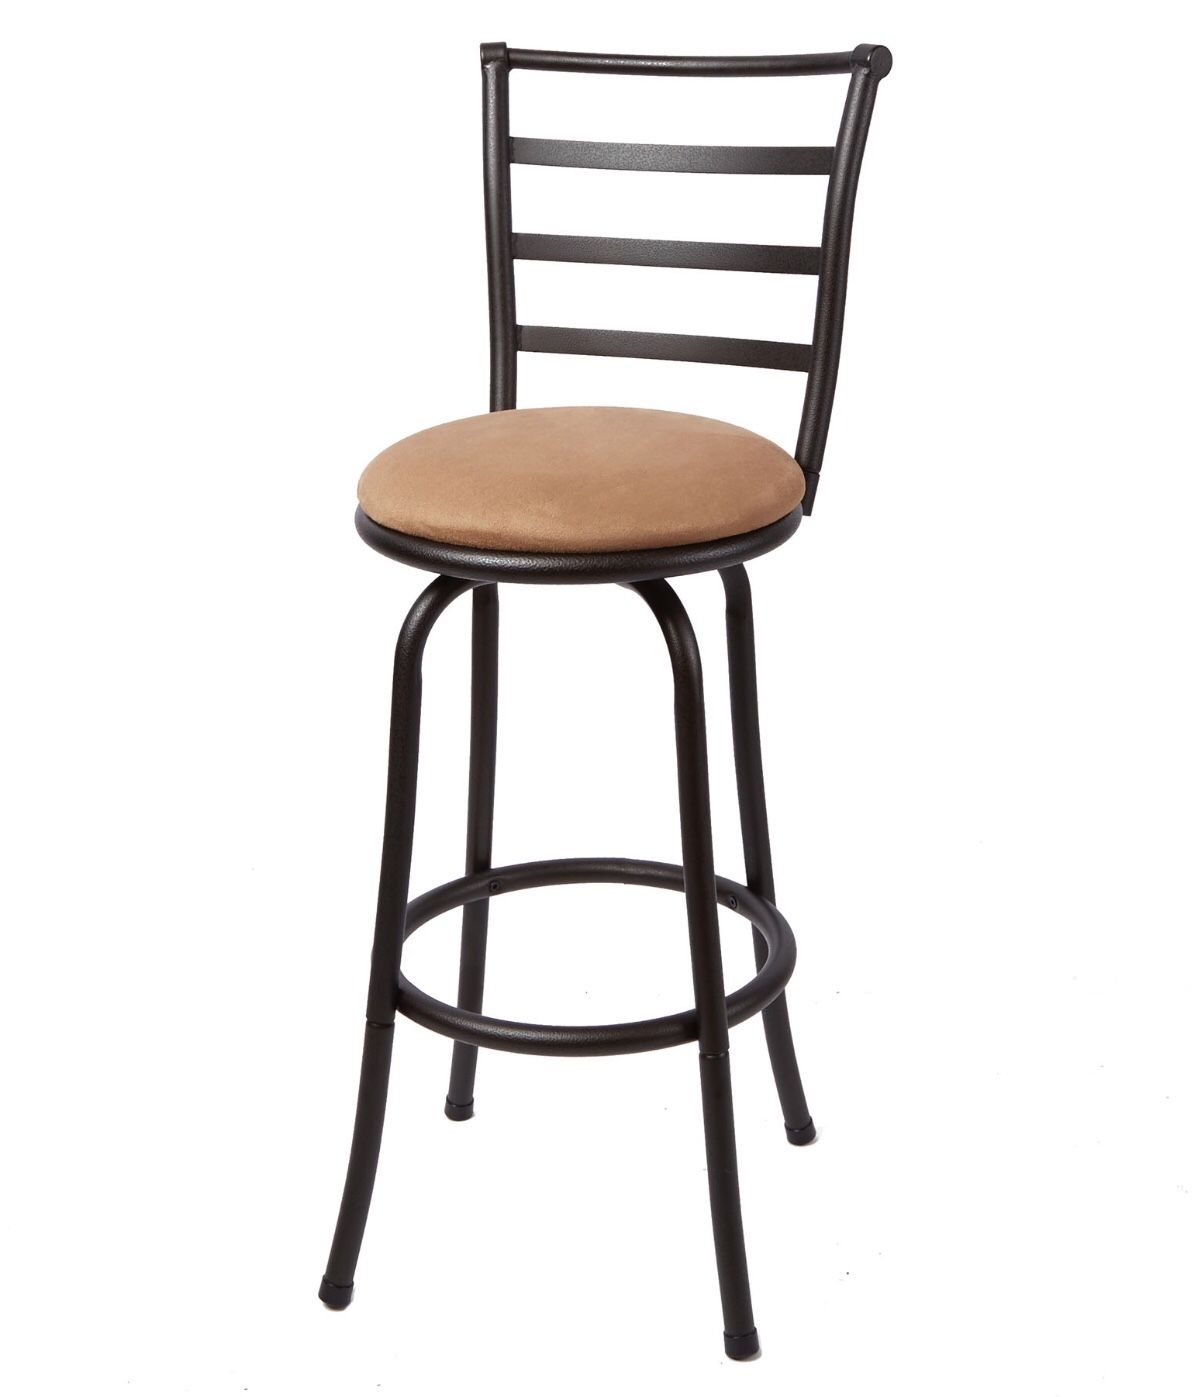 4 almost new bar stools 29” height